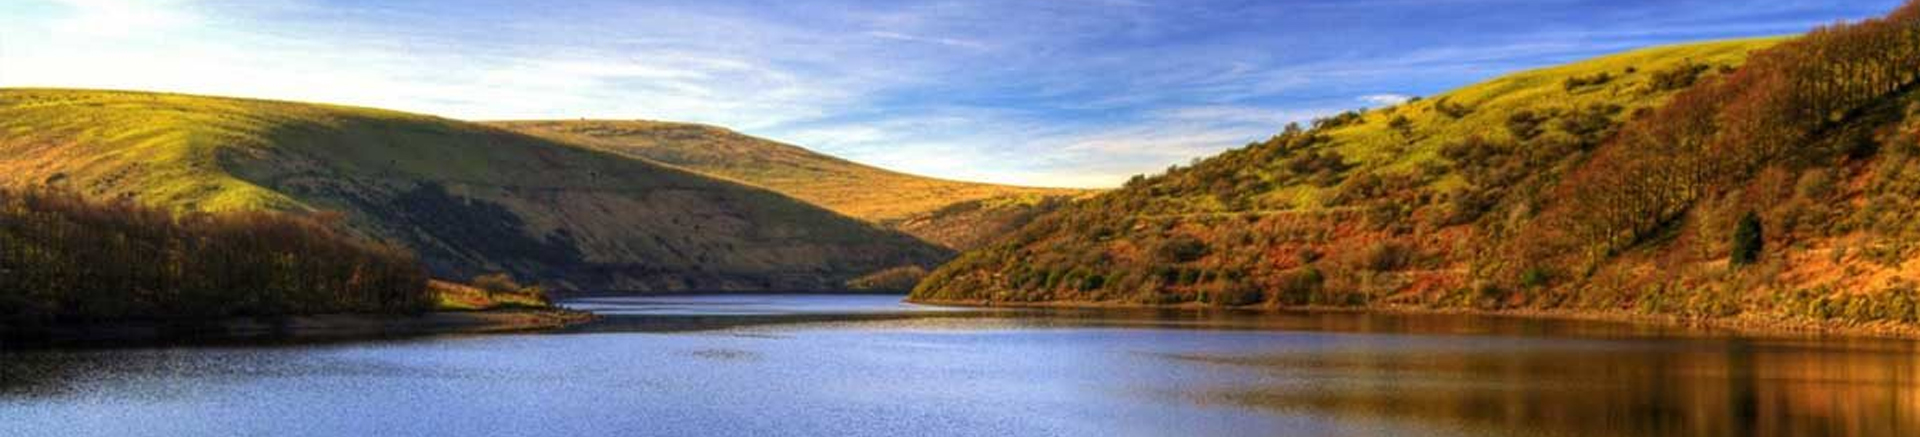 beautiful meldon reservoir, moorland in autumnal colours with flat reflective water